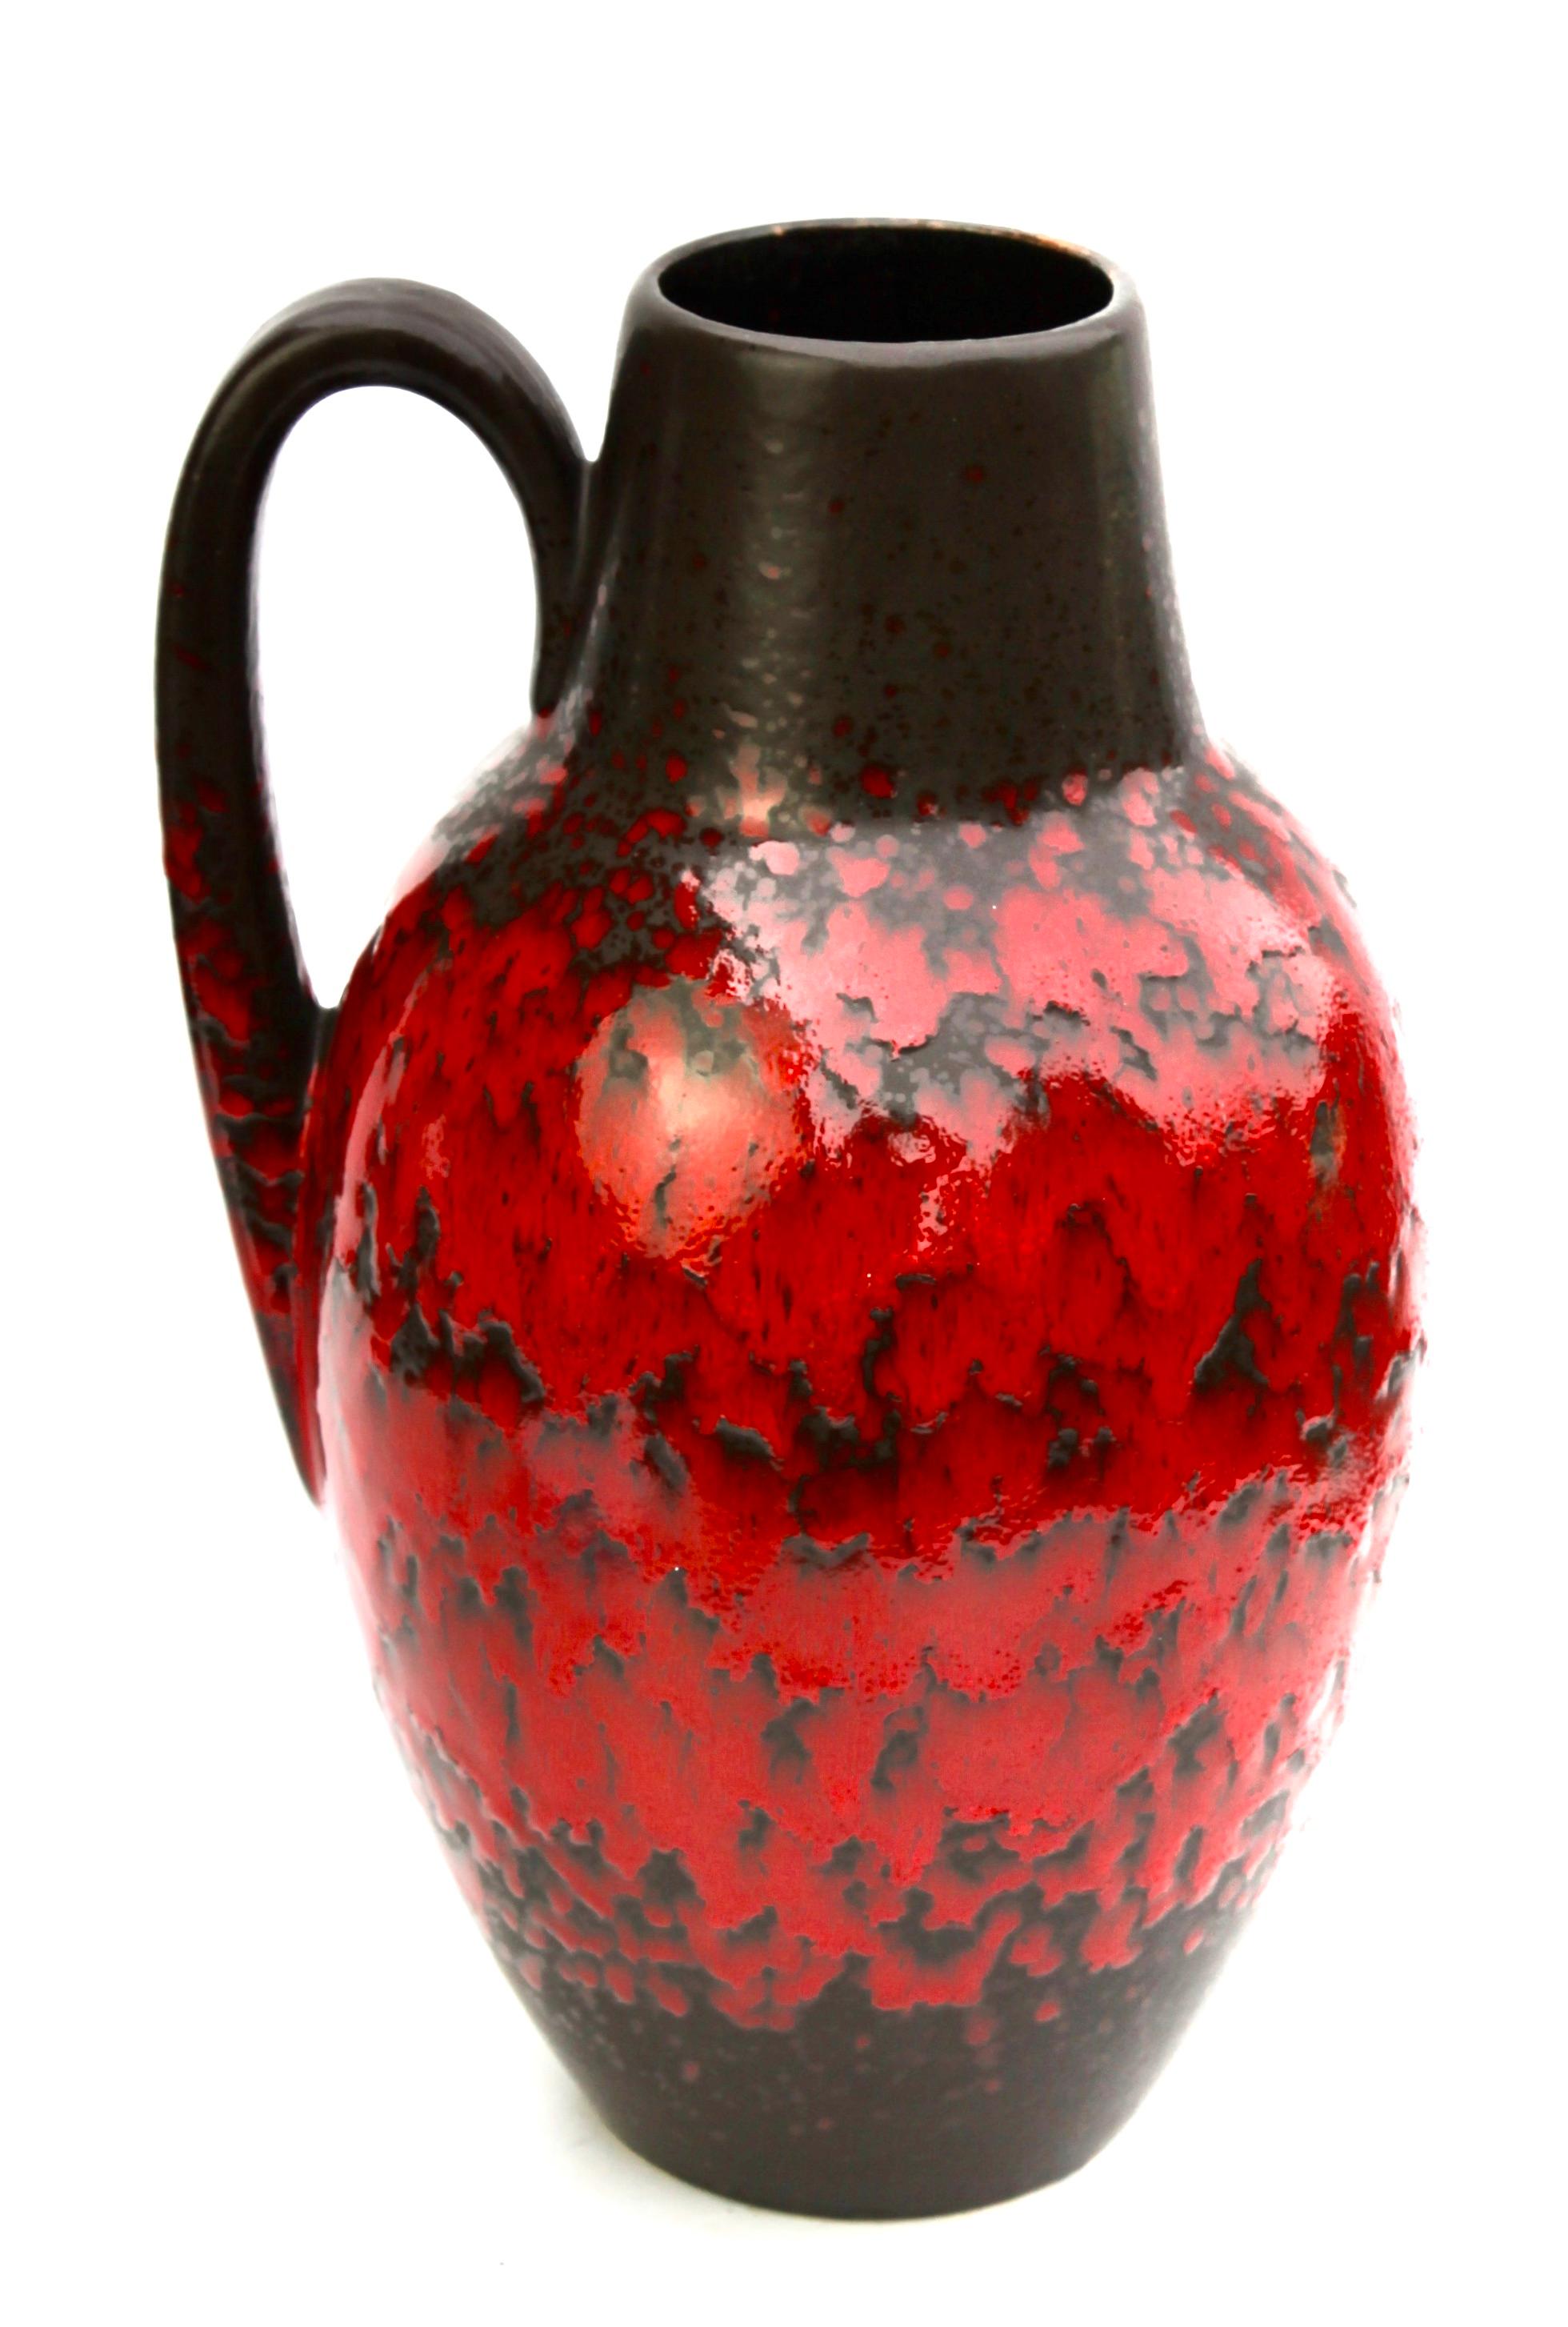 Hand-Painted Fat Lava Floor Vase with Red Drip-Glaze 'Scheurich 279-38, W-Germany' 1960s